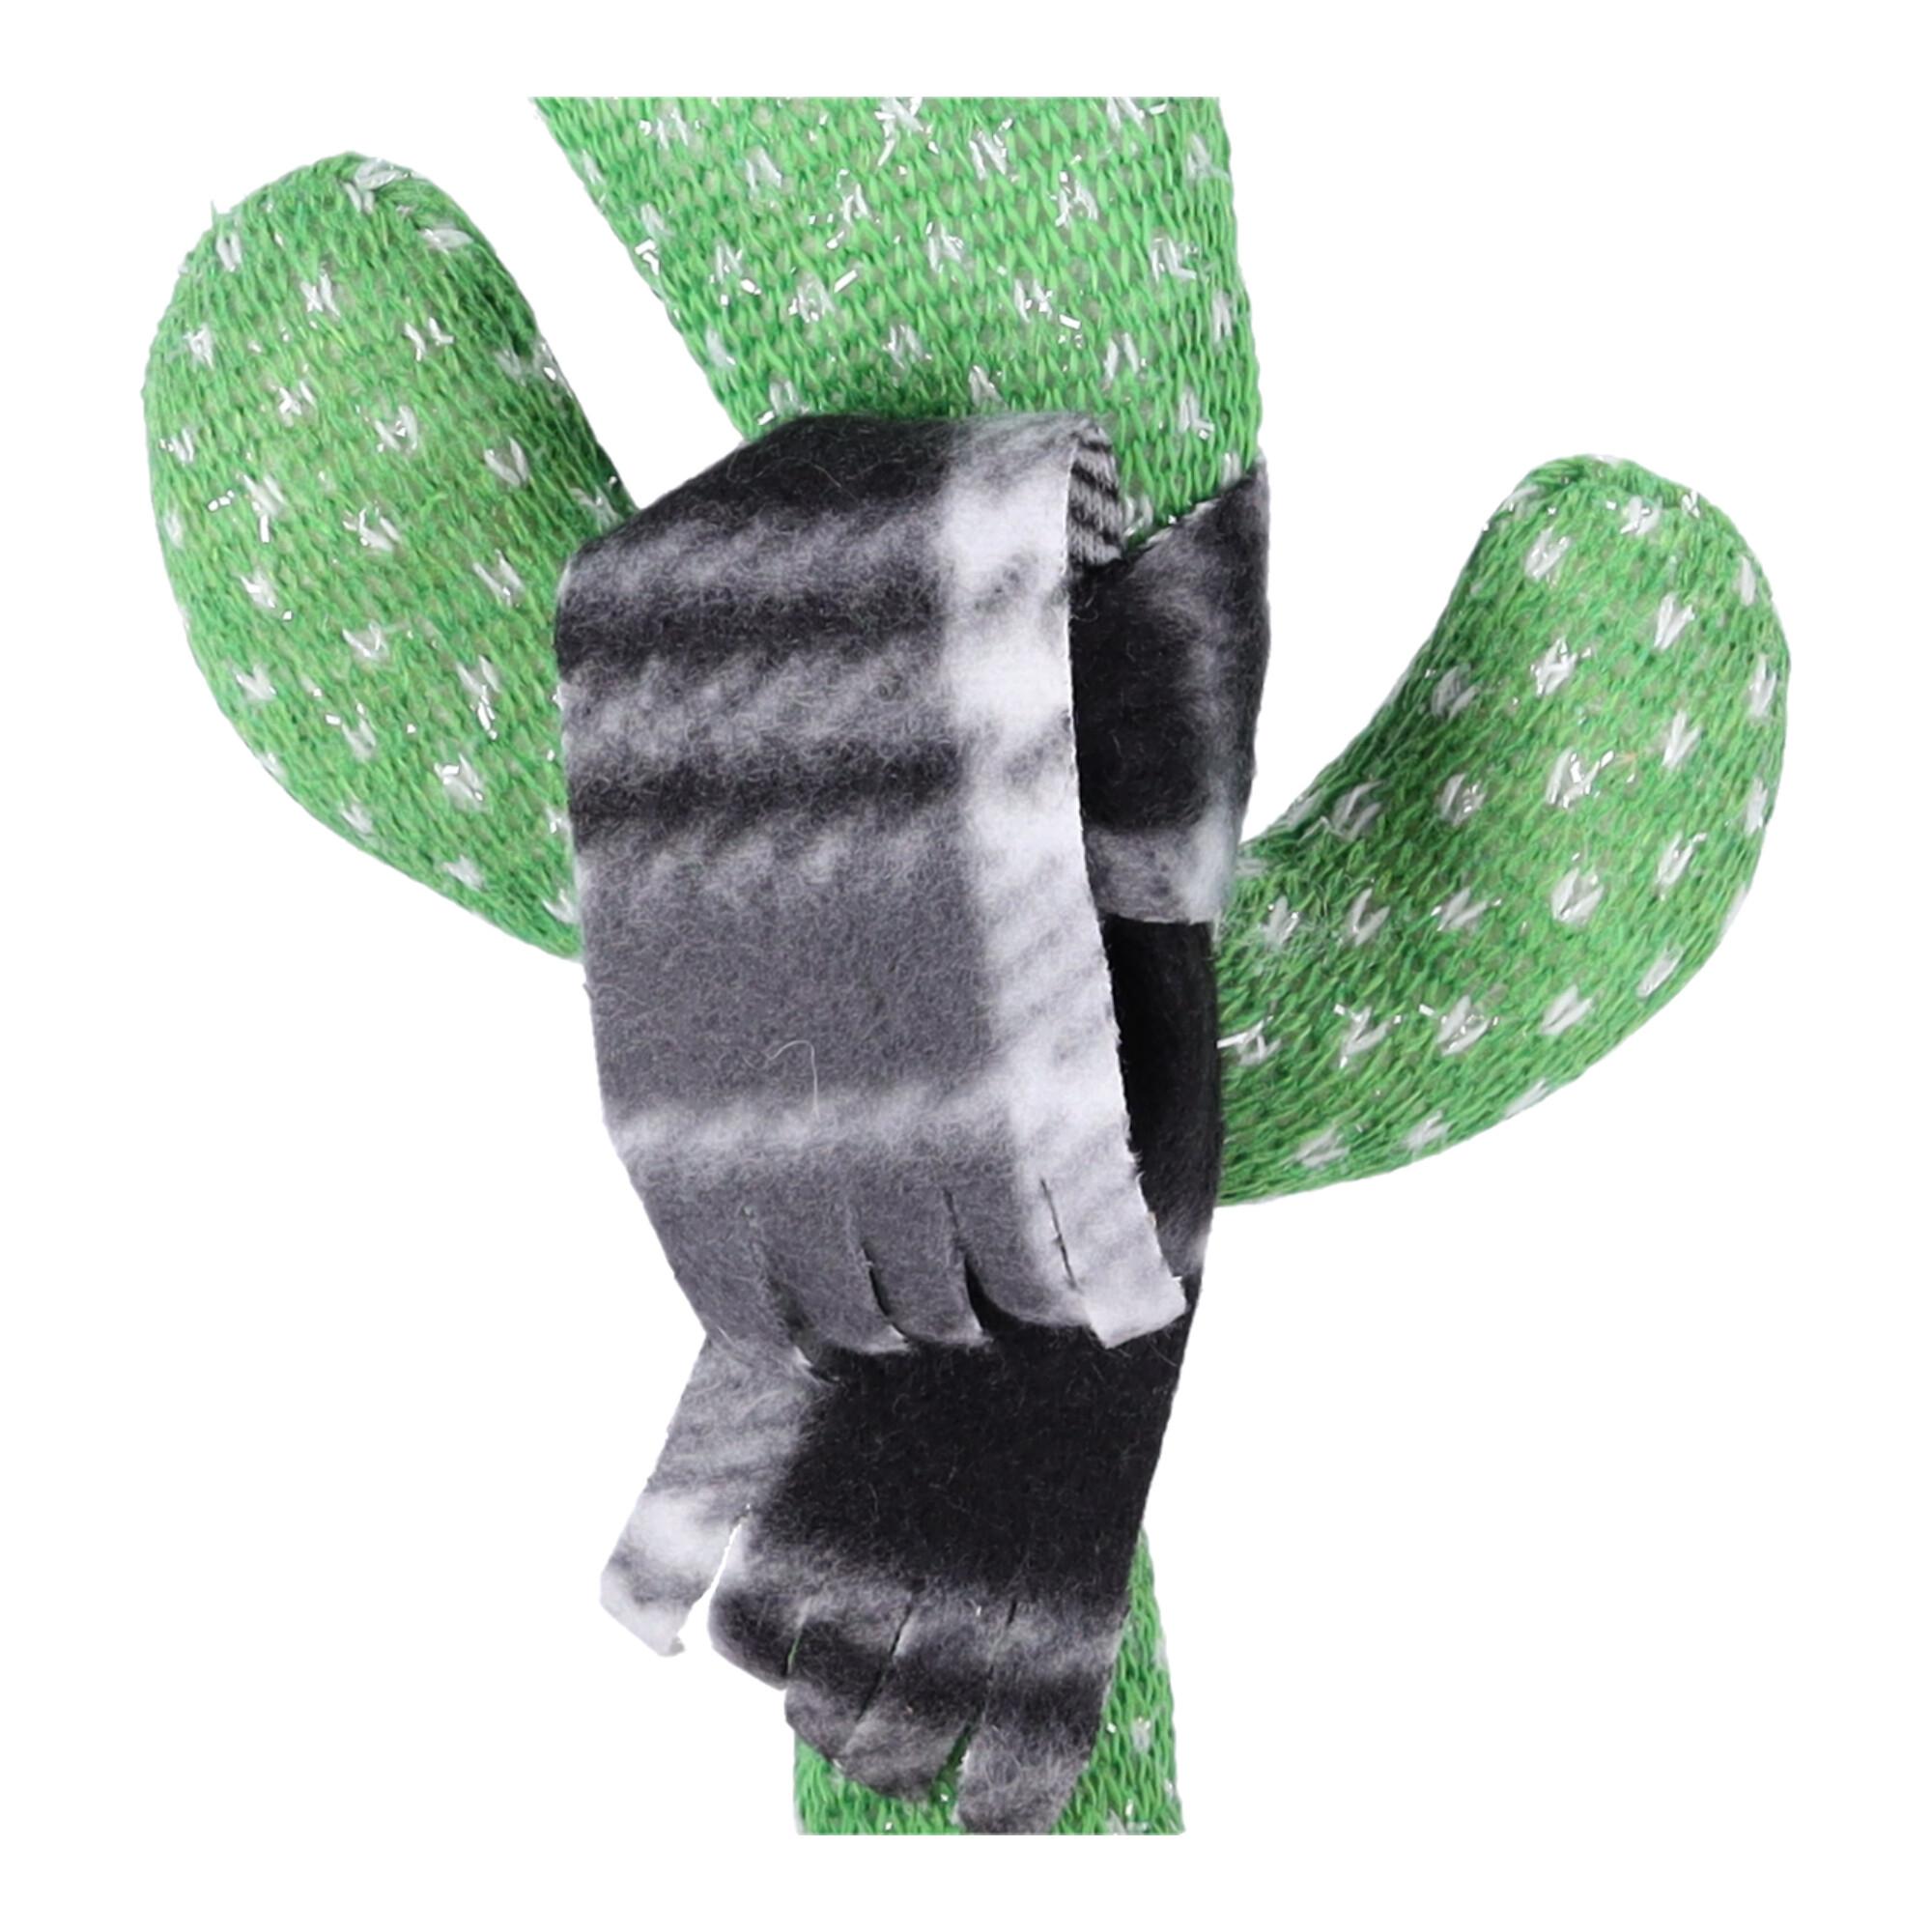 Children's toy - Dancing cactus - with black checkered scarf and purple hat